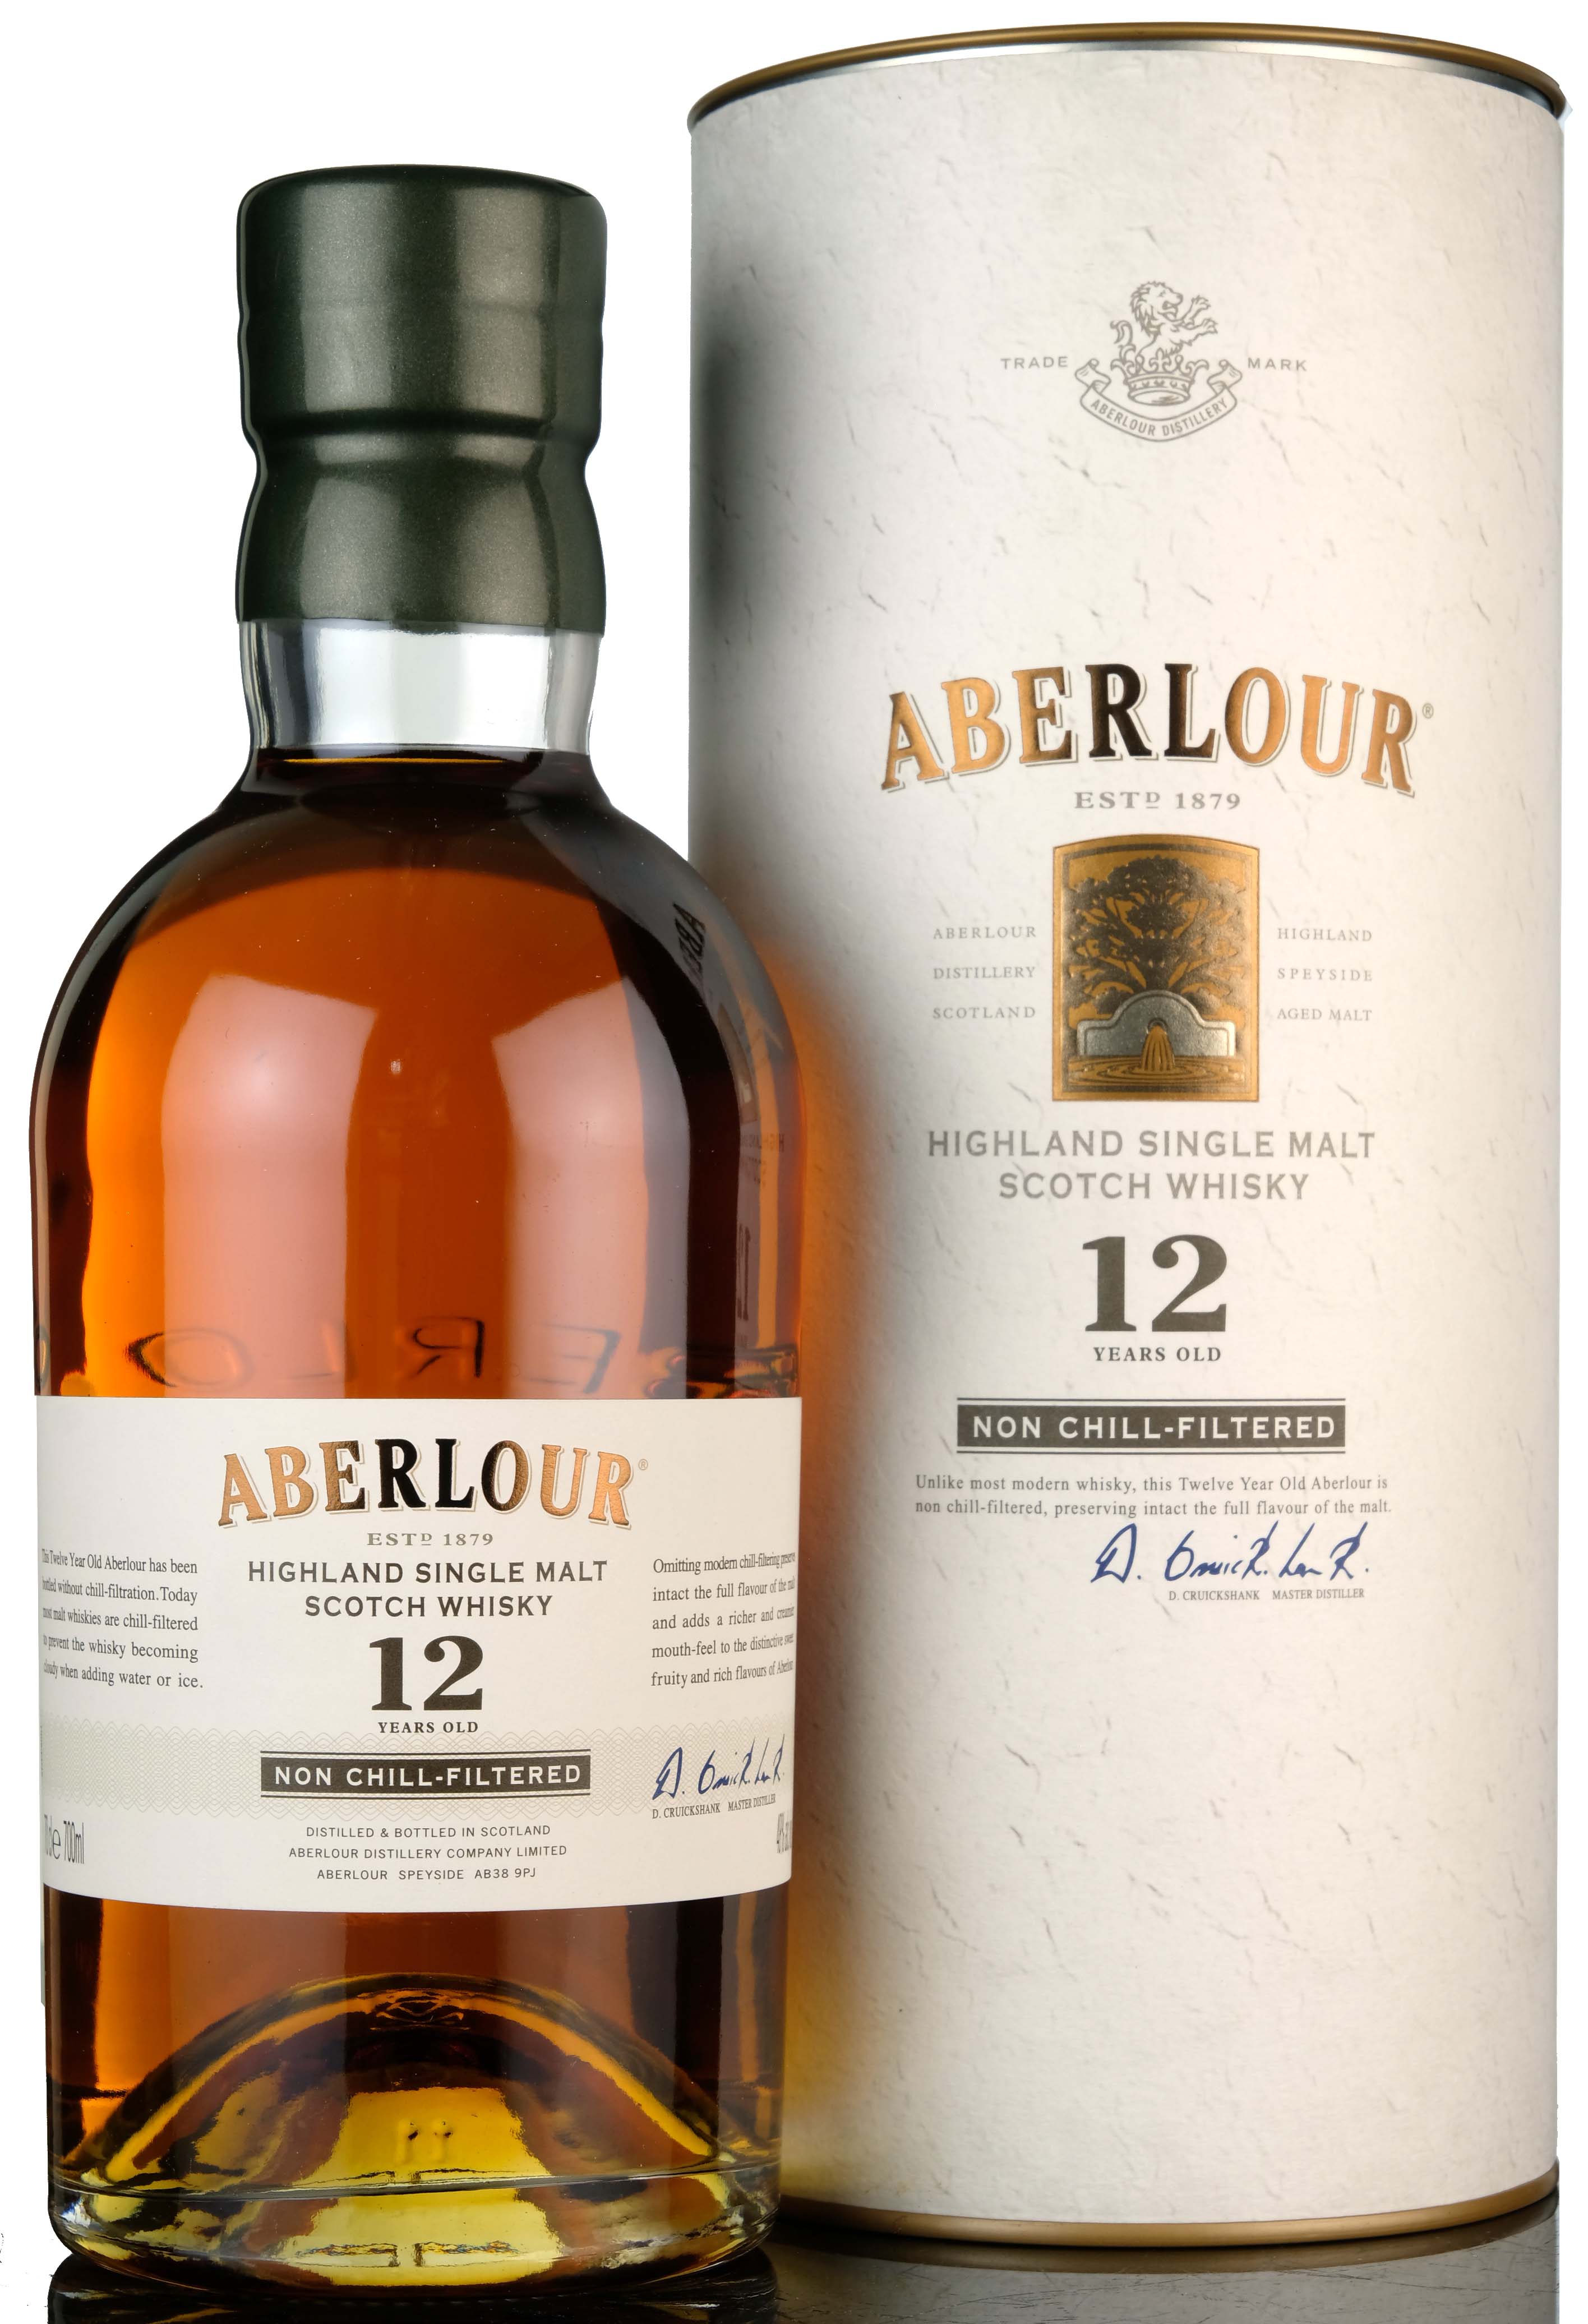 Aberlour 12 Year Old - Non Chill-Filtered